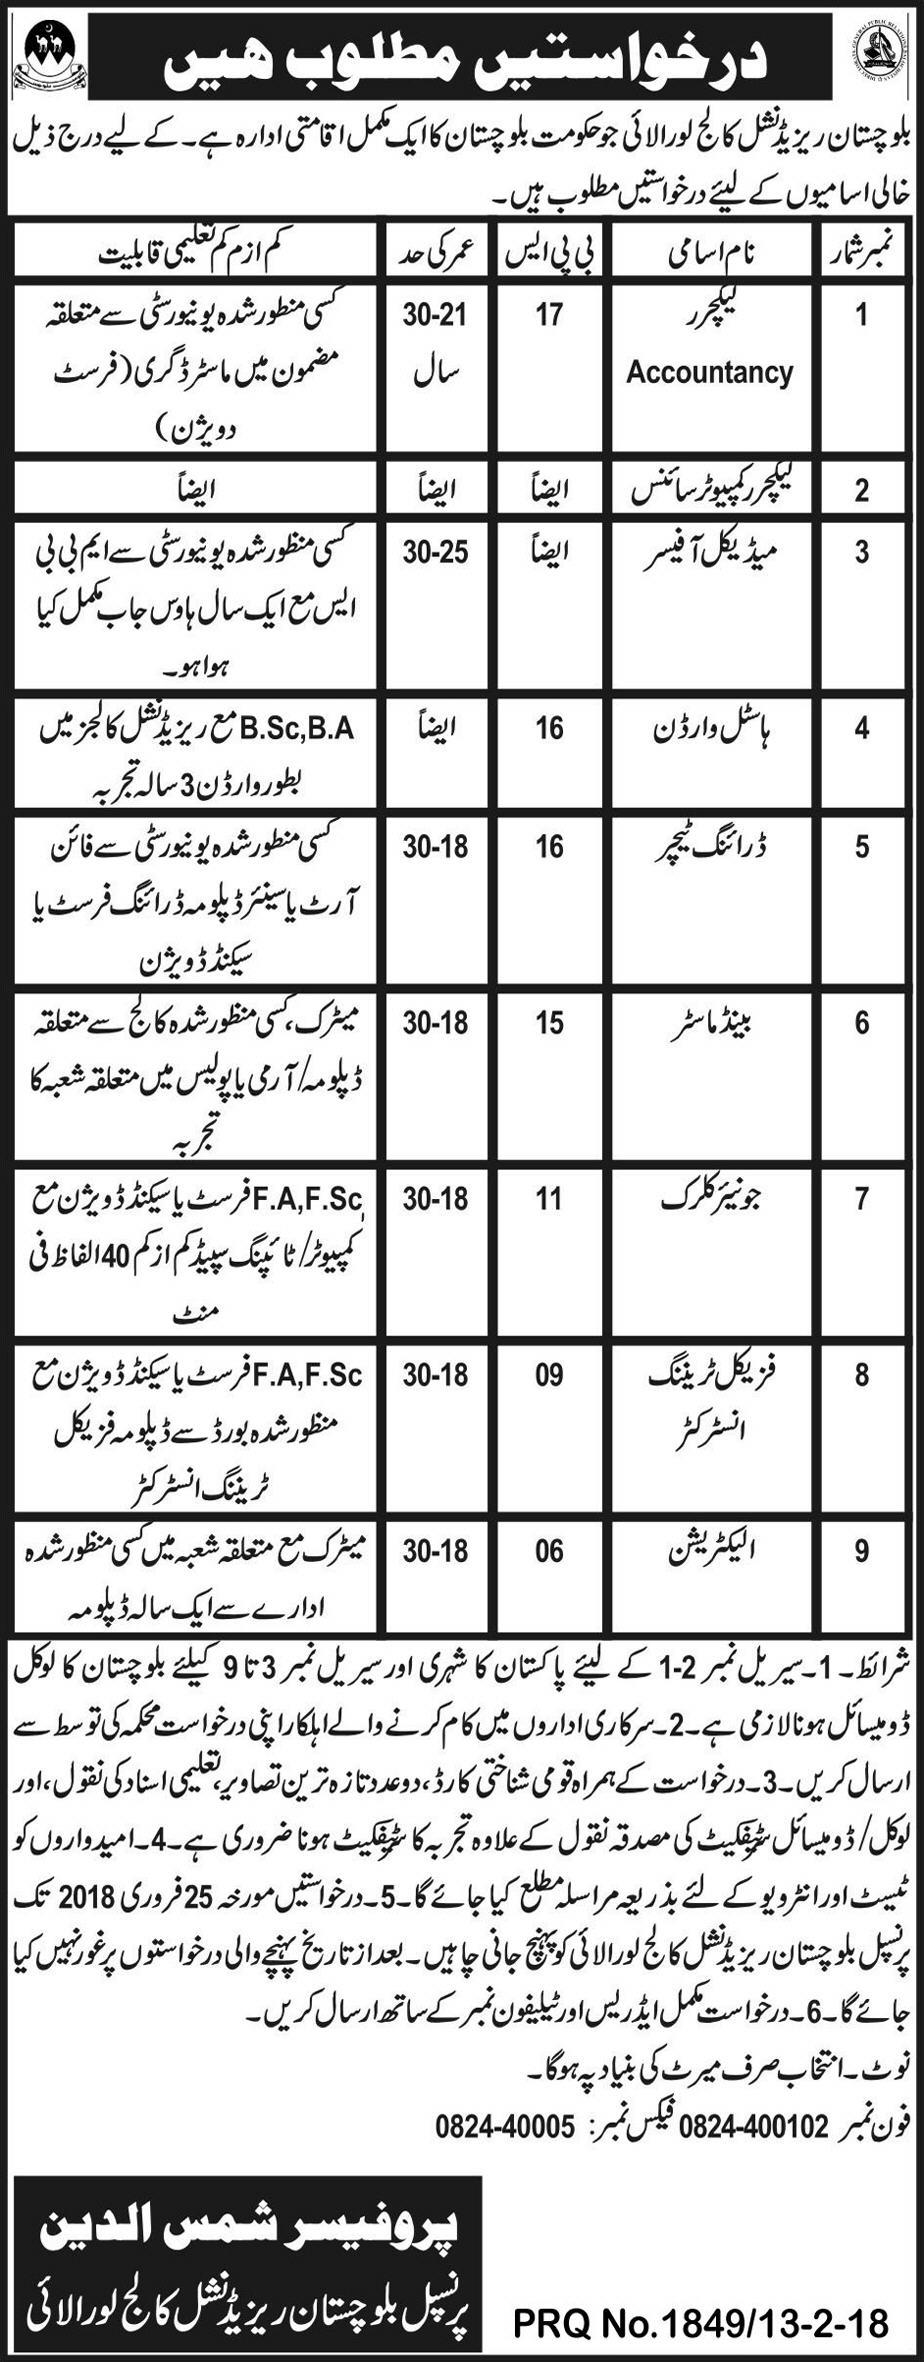 Baluchistan Residential College Loralai New Jobs, 15th February 2018 Daily Express Newspaper.